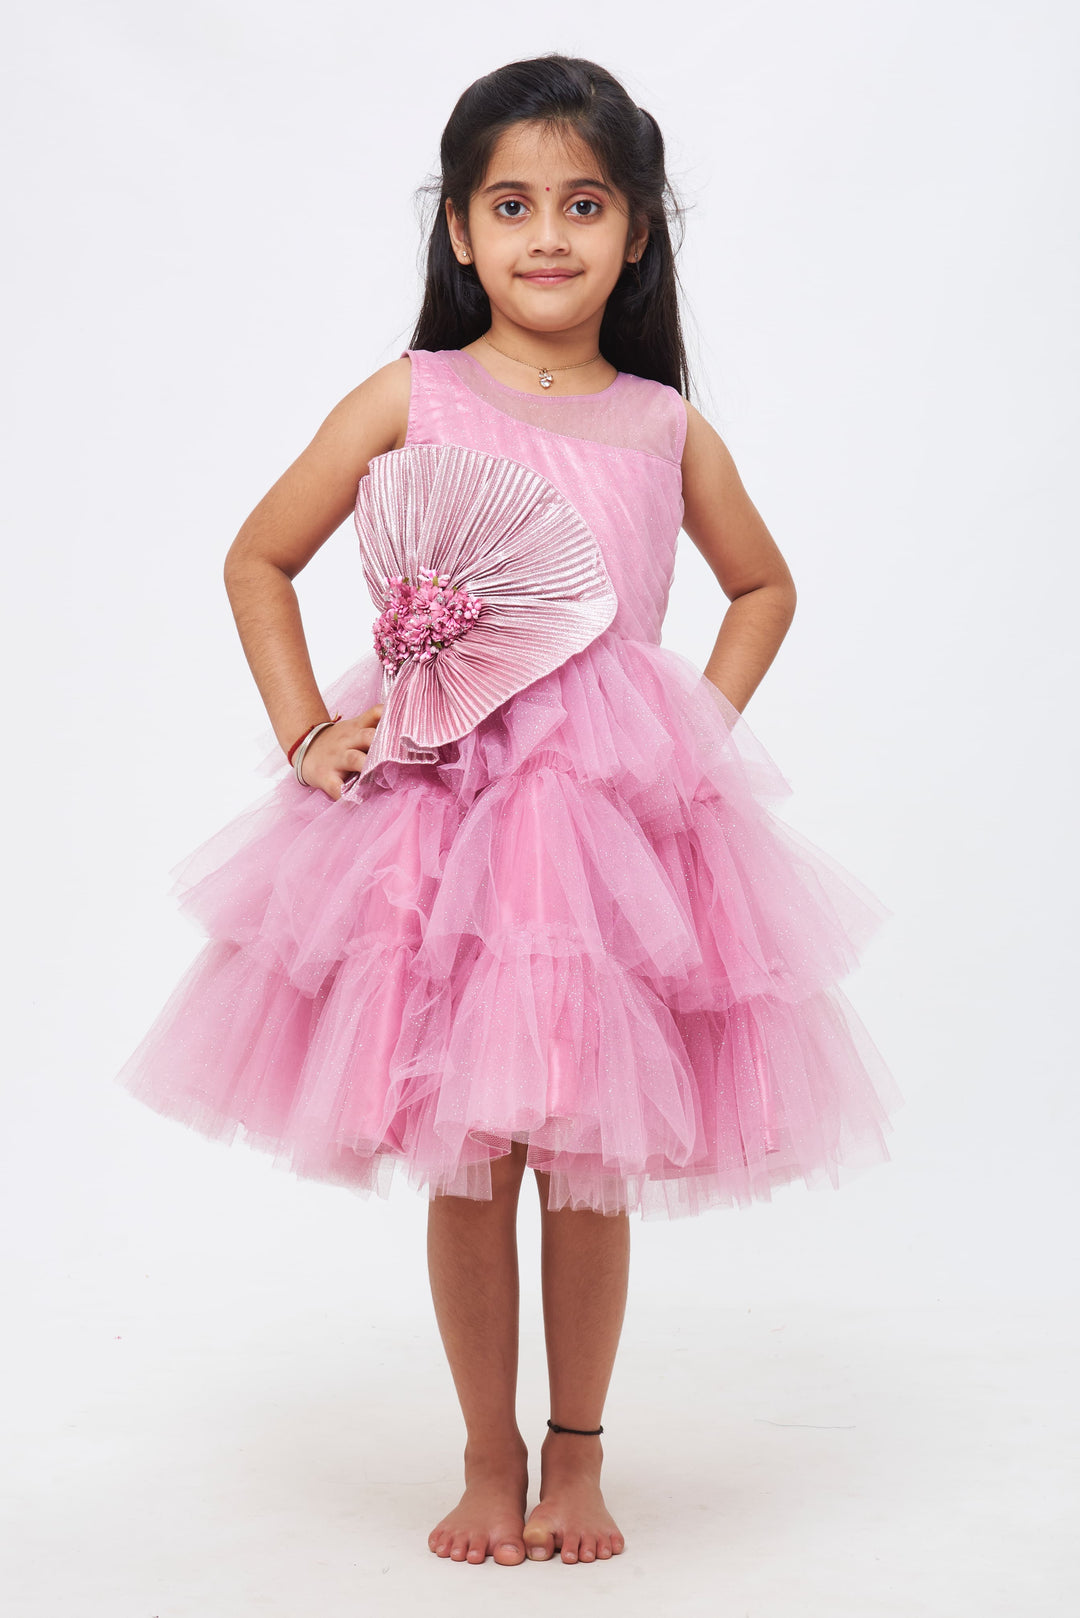 The Nesavu Girls Tutu Frock Enchanted Rose Tulle Dress with Pleated Floral Detail Nesavu 16 (1Y) / Pink / Plain Net PF151B-16 Rose Tulle Dress with Pleated Floral Accent - Delicate Elegance for Little Ladies | The Nesavu